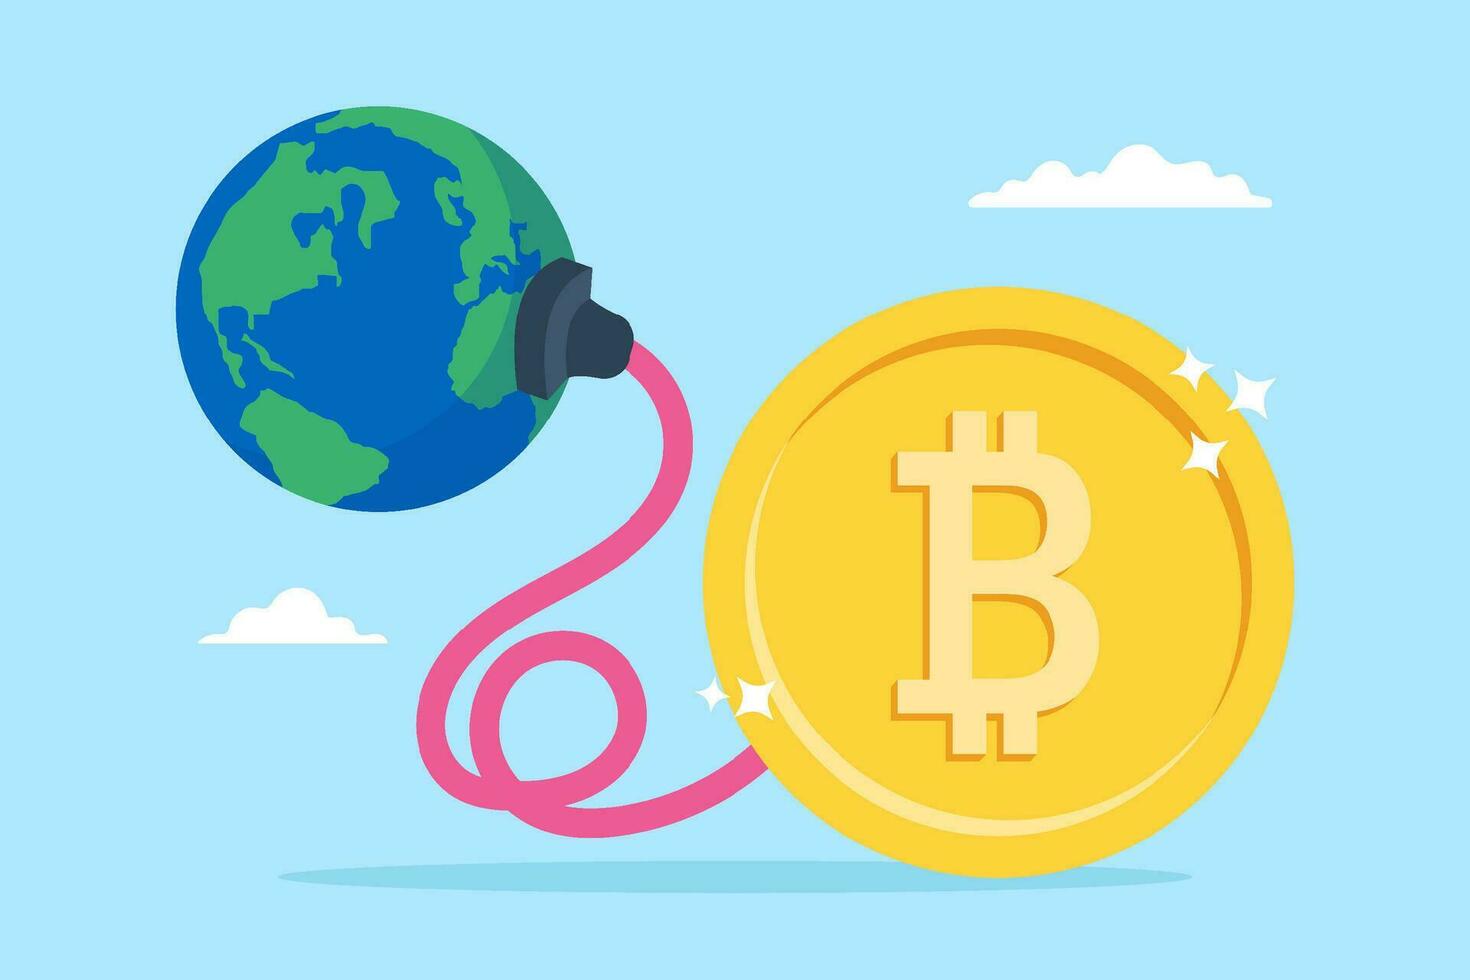 Bitcoin power plug absorbing energy from earth in flat design vector